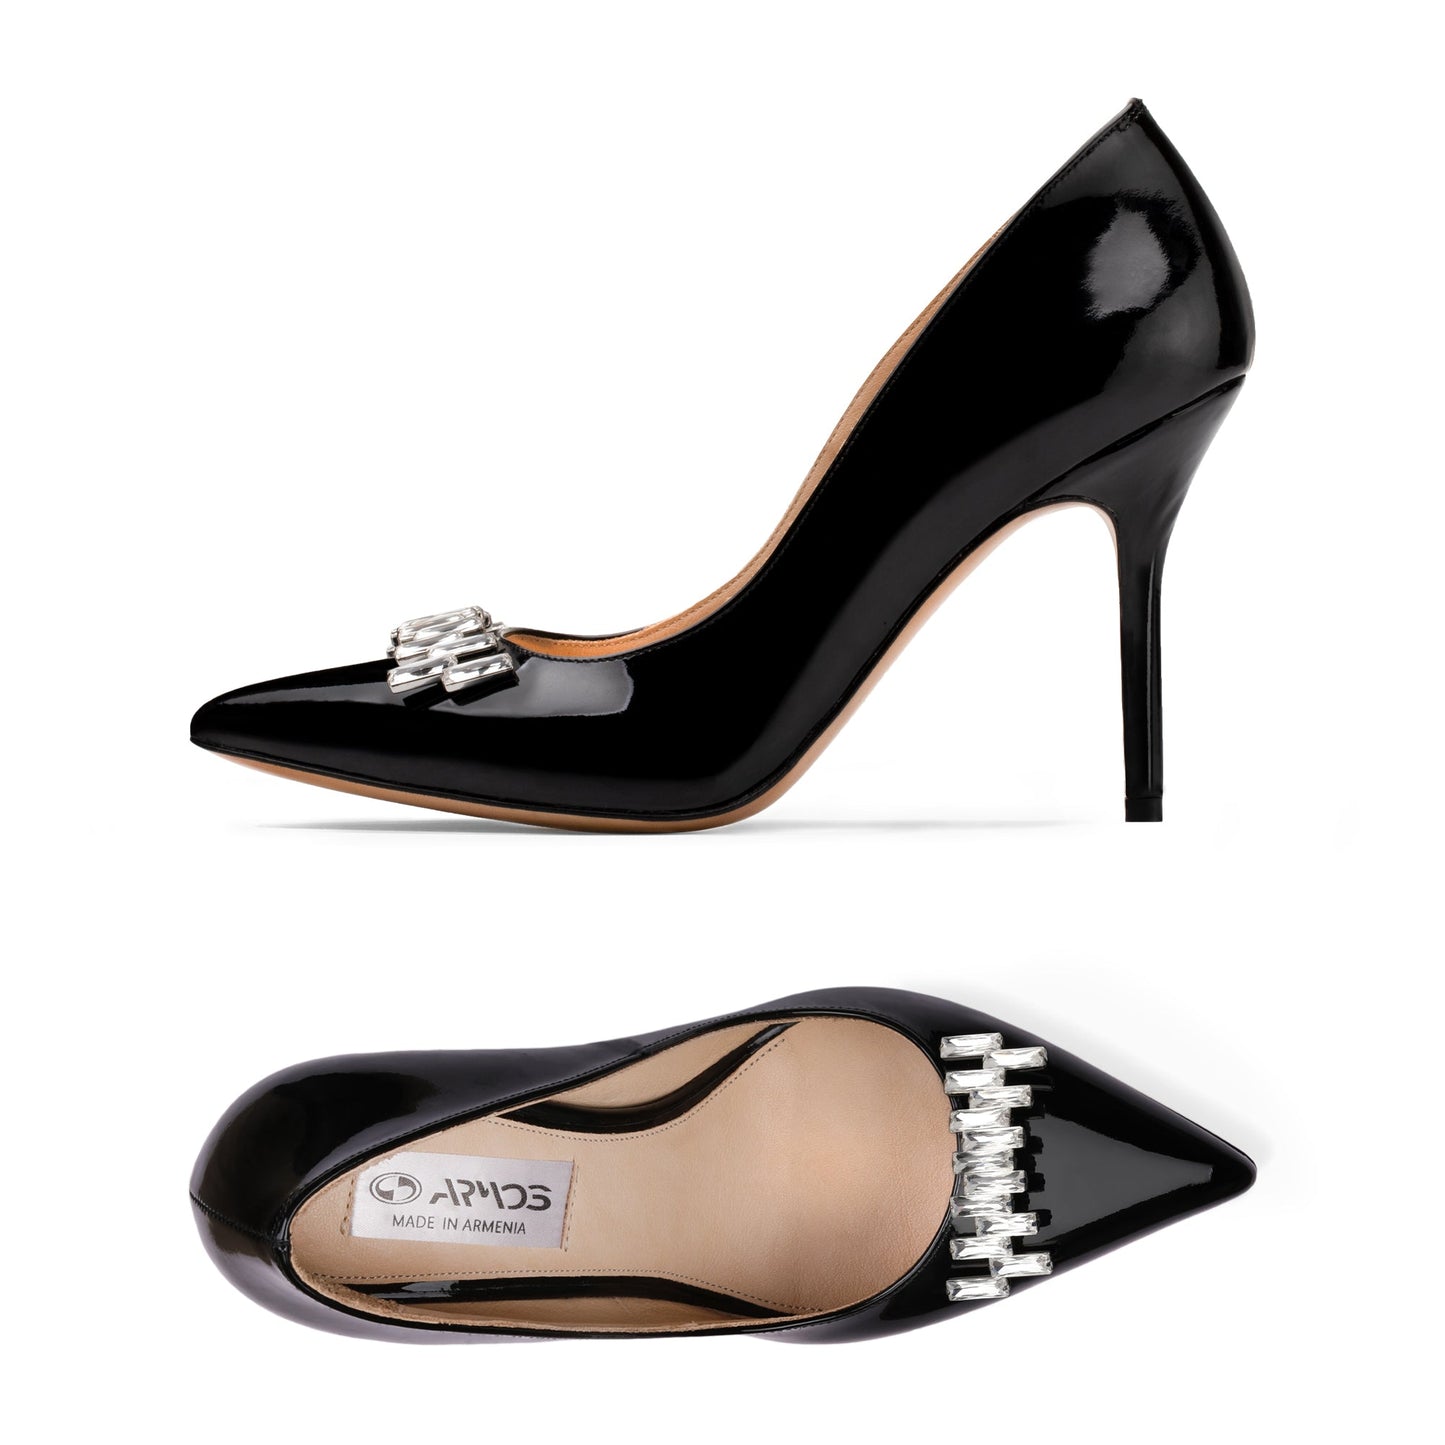 Black pumps with a brooch